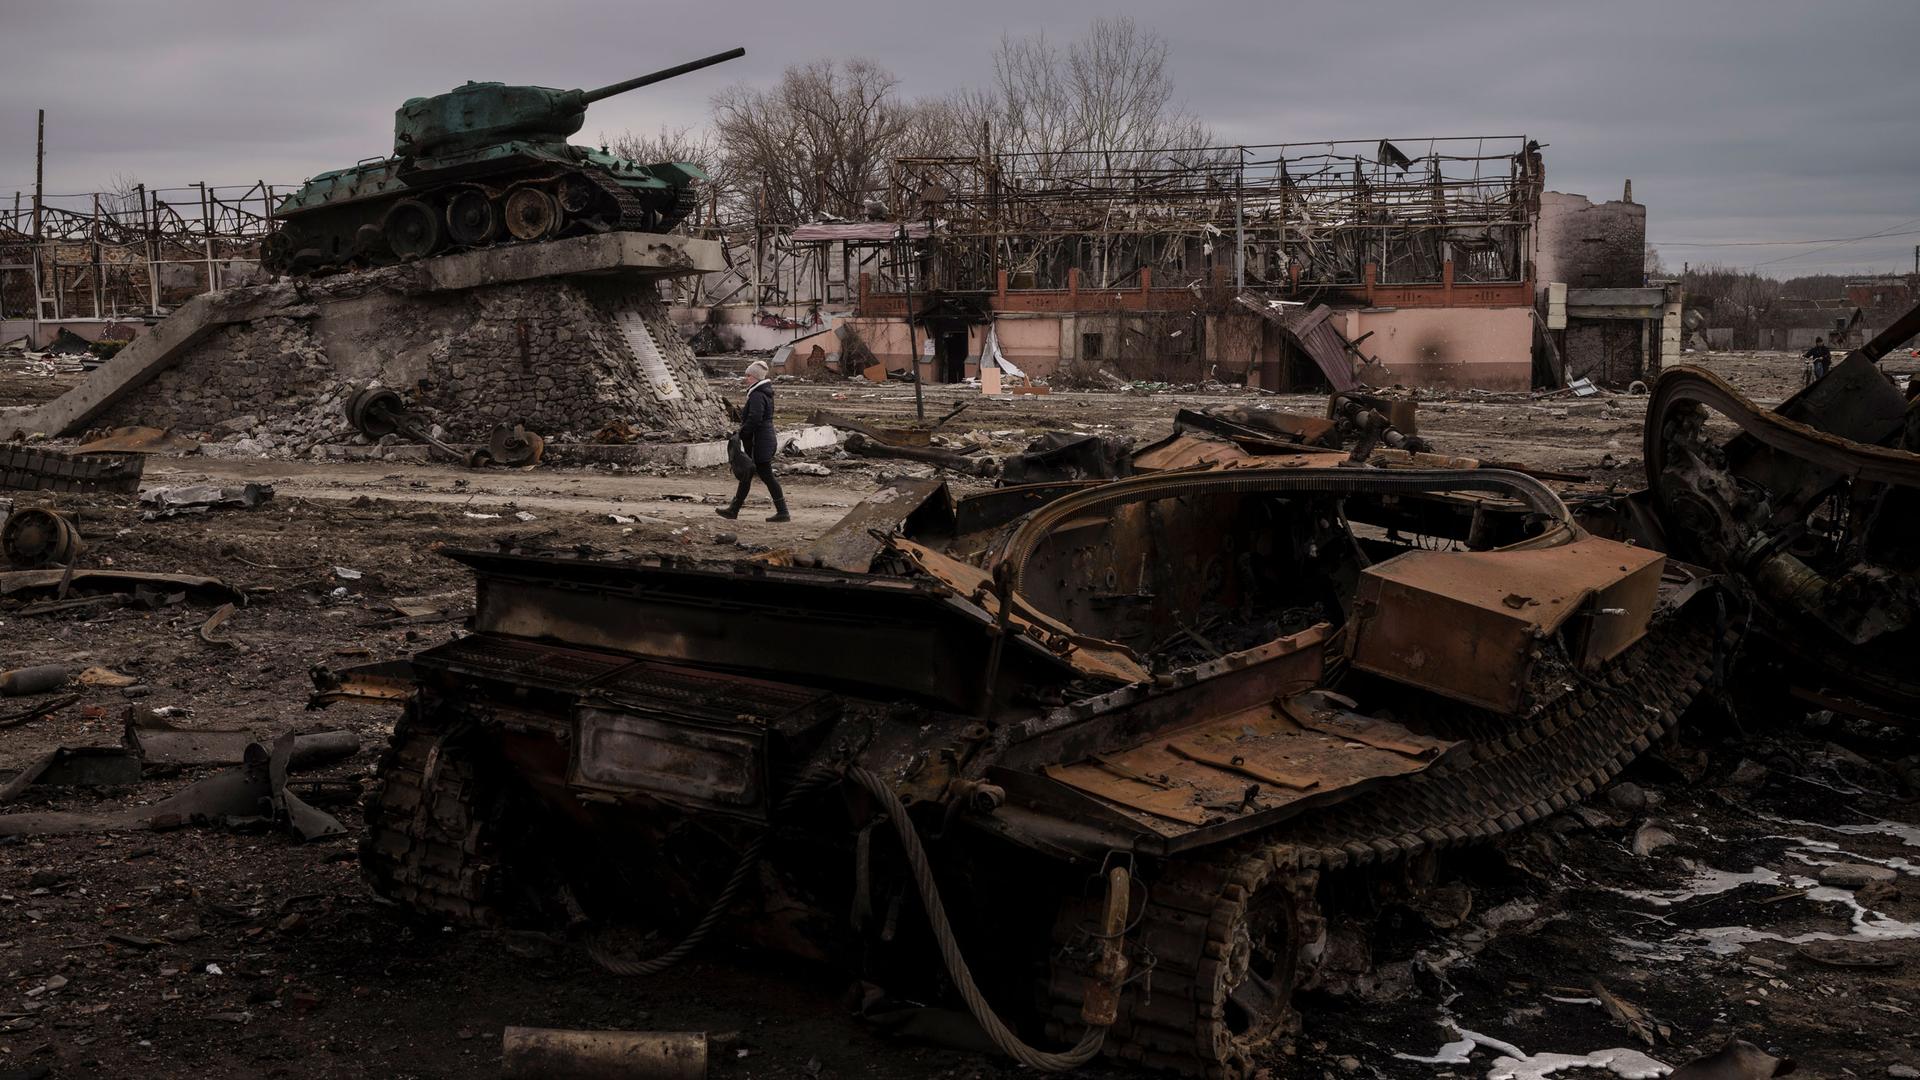 A woman walks past a destroyed tank in the town of Trostsyanets, Ukraine, Monday, March 28, 2022.